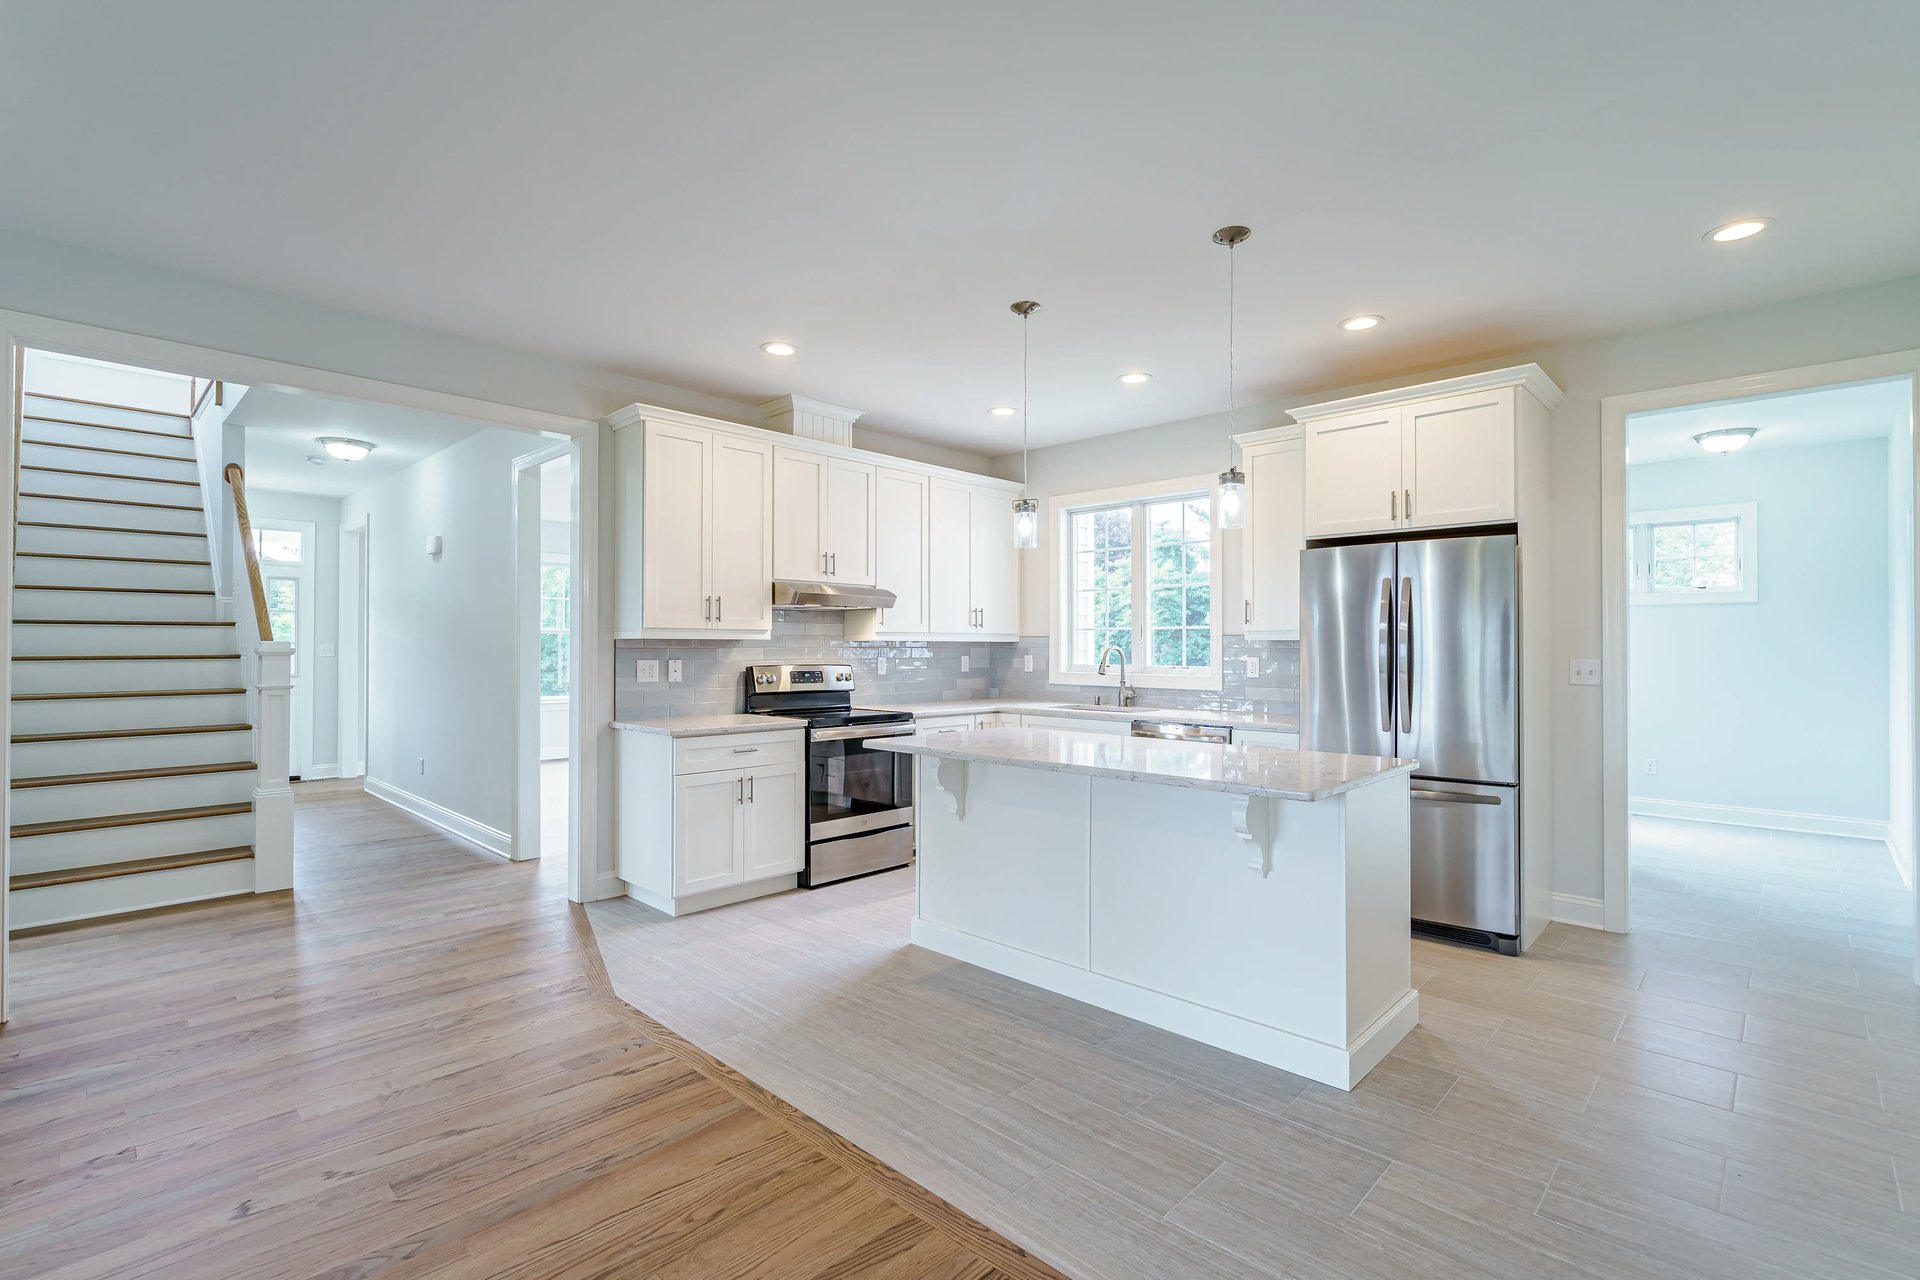 kitchen inside custom home with white cabinets and island by gtg builders in central new jersey